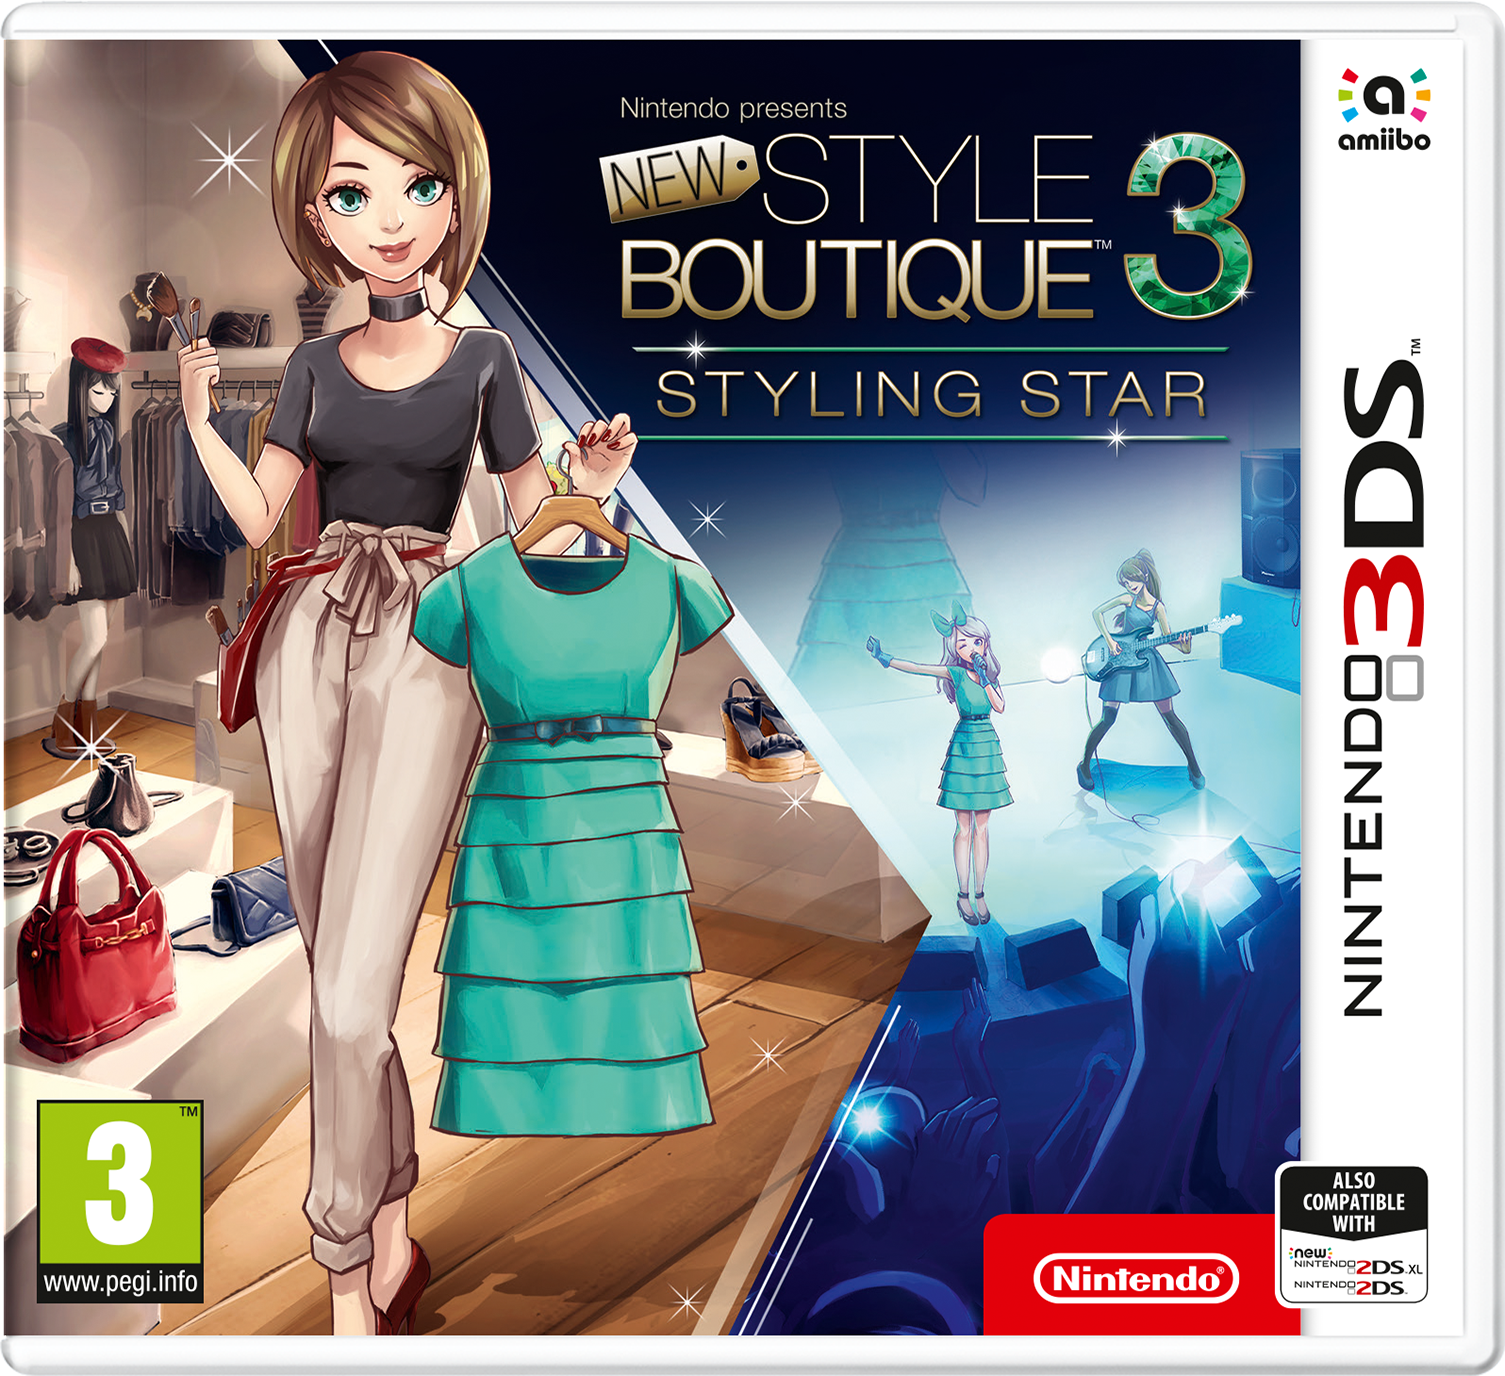 Opia boutique 3. New Style Boutique 3 – styling Star. New Style Boutique [3ds]. Nintendo presents: New Style Boutique 2. New Style Boutique 2 on 3ds.